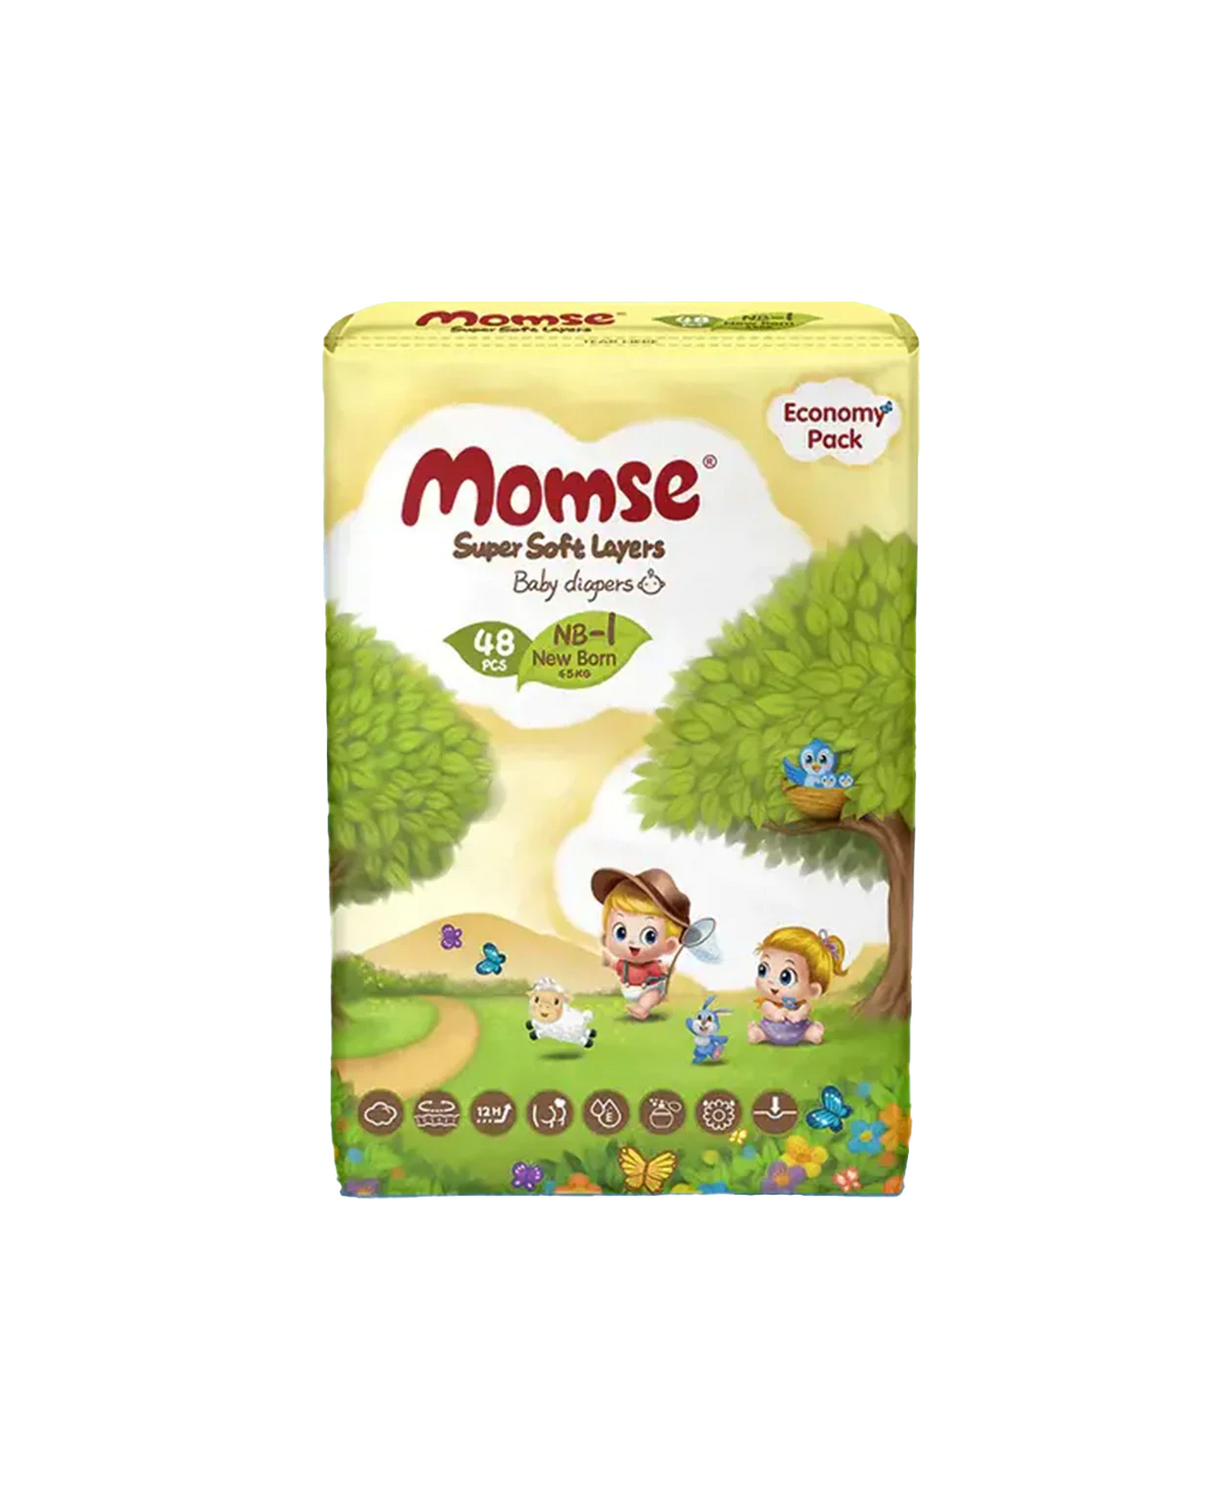 momse diapers economy pack nb-1 48pc